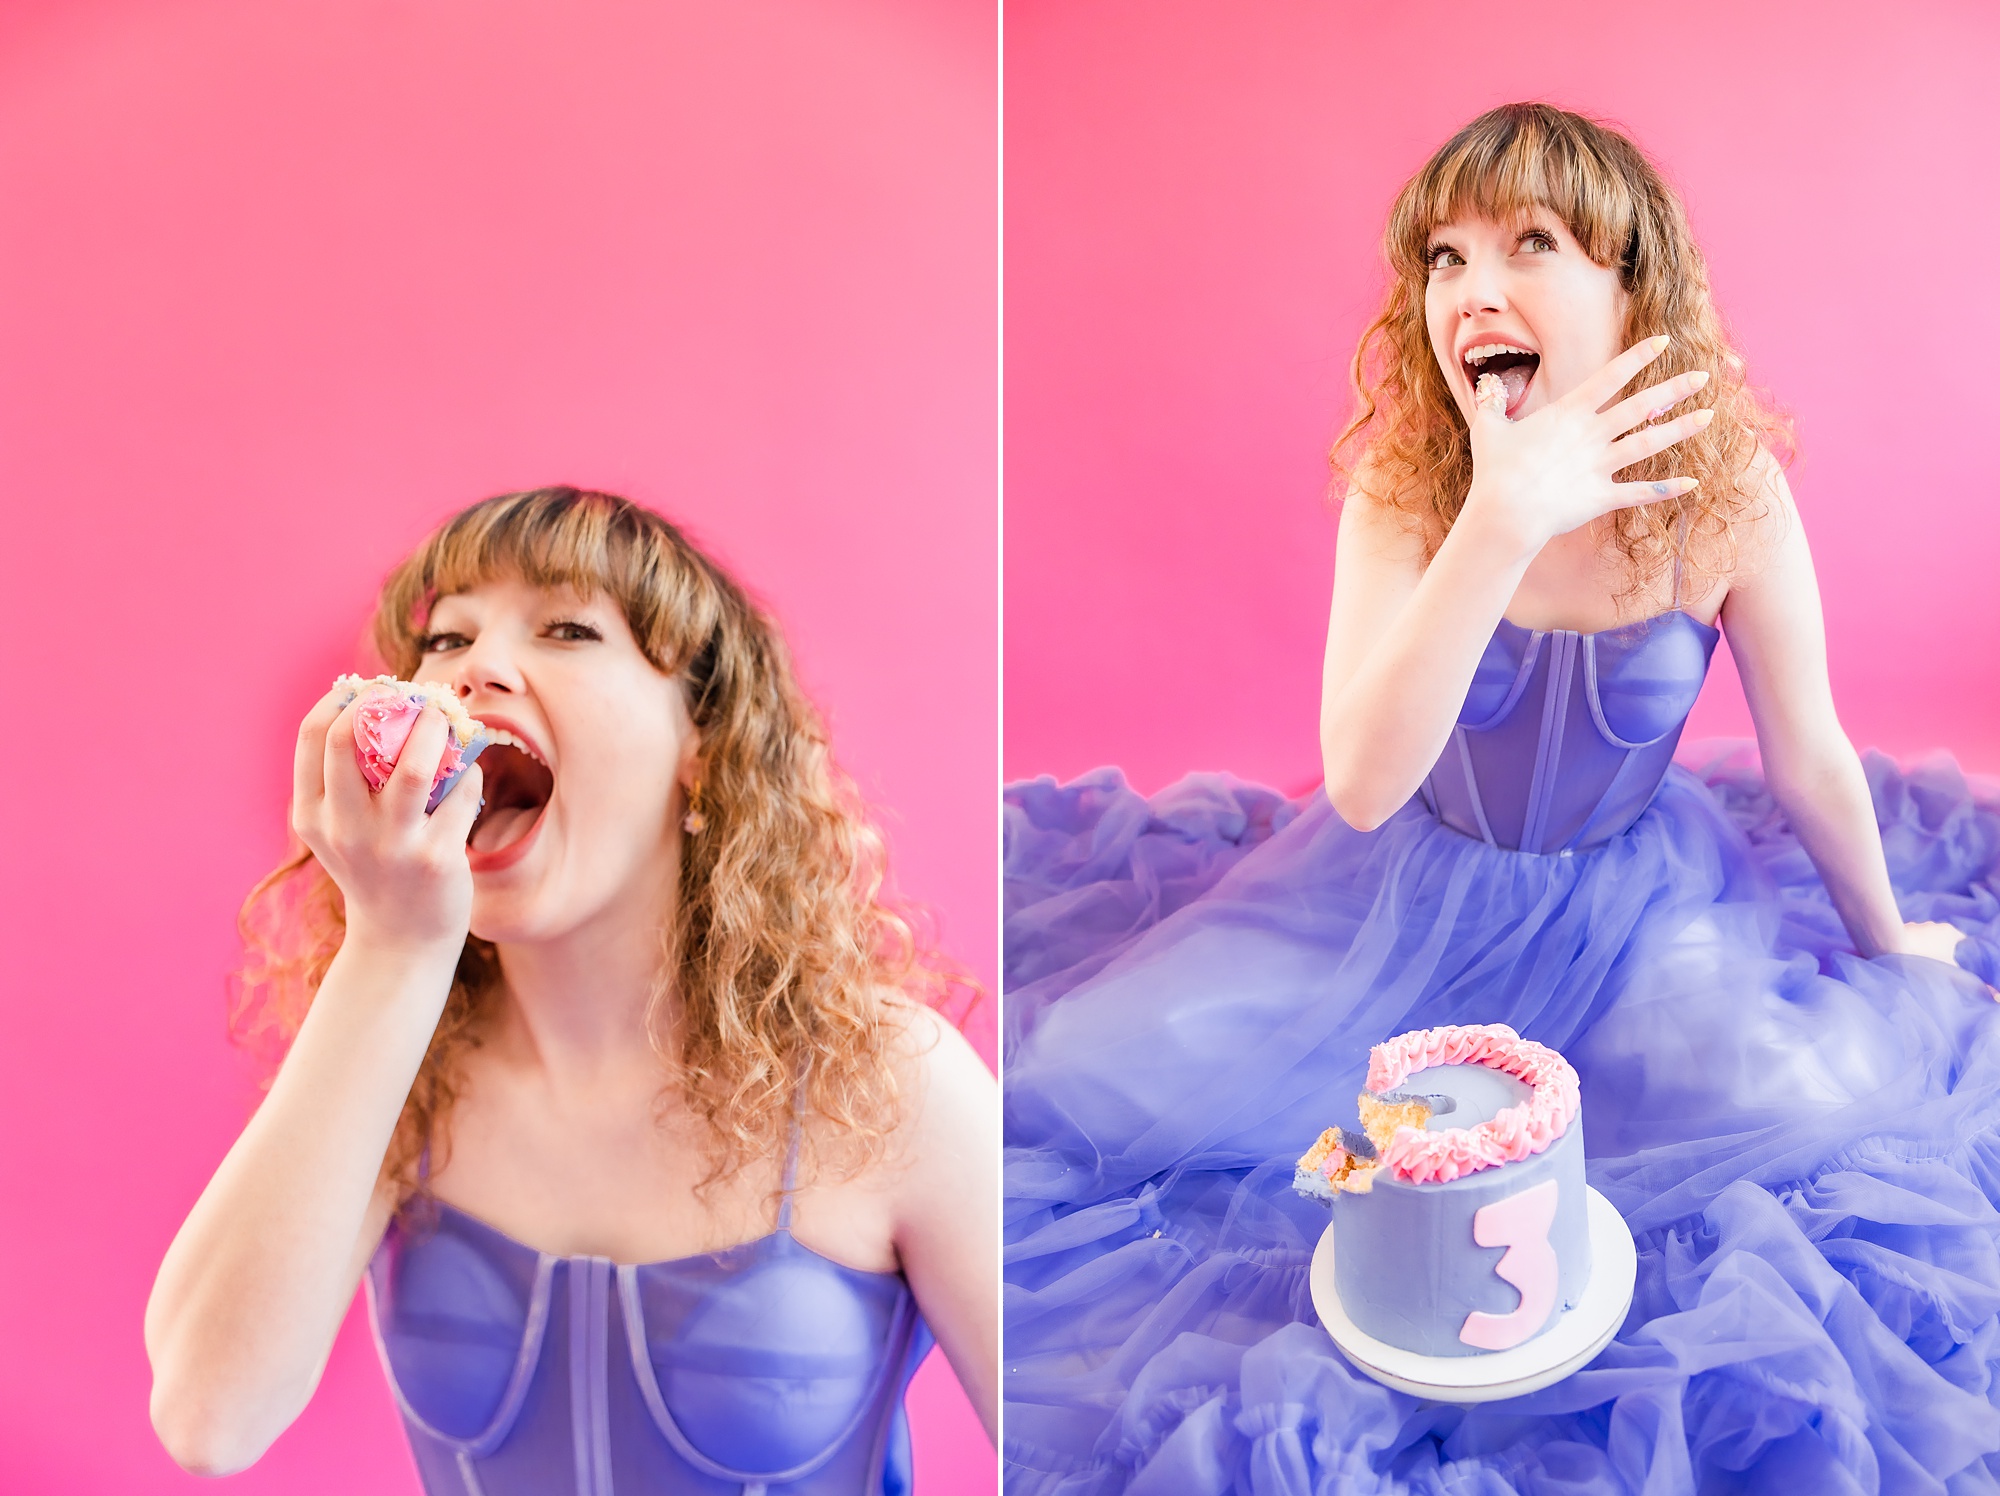 woman eats purple and pink cake during playful branding portraits